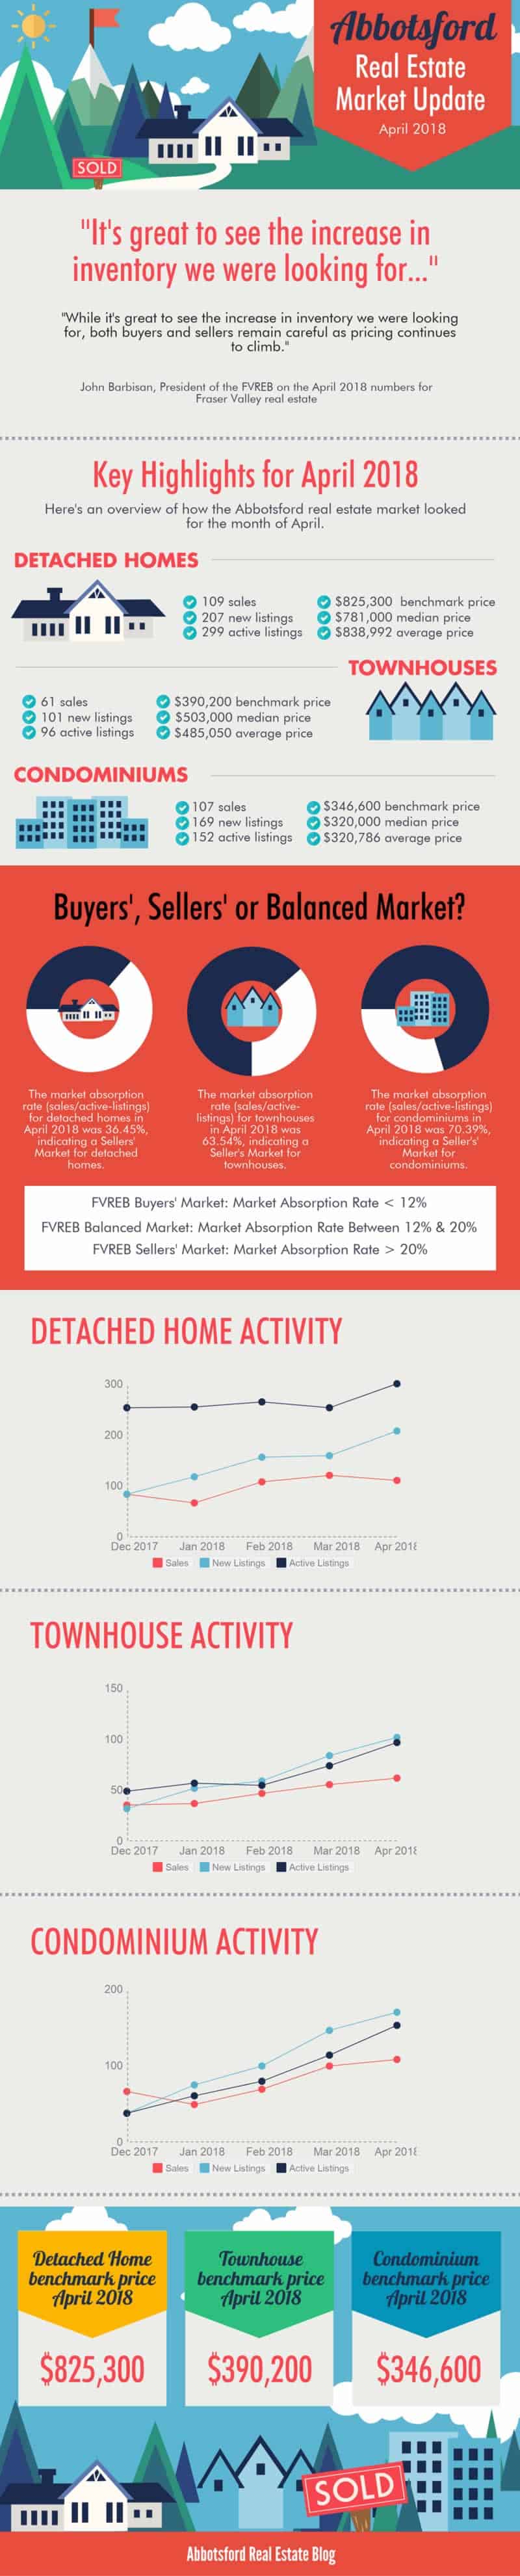 Abbotsford Detached Home Market Update April 2018 Infographic